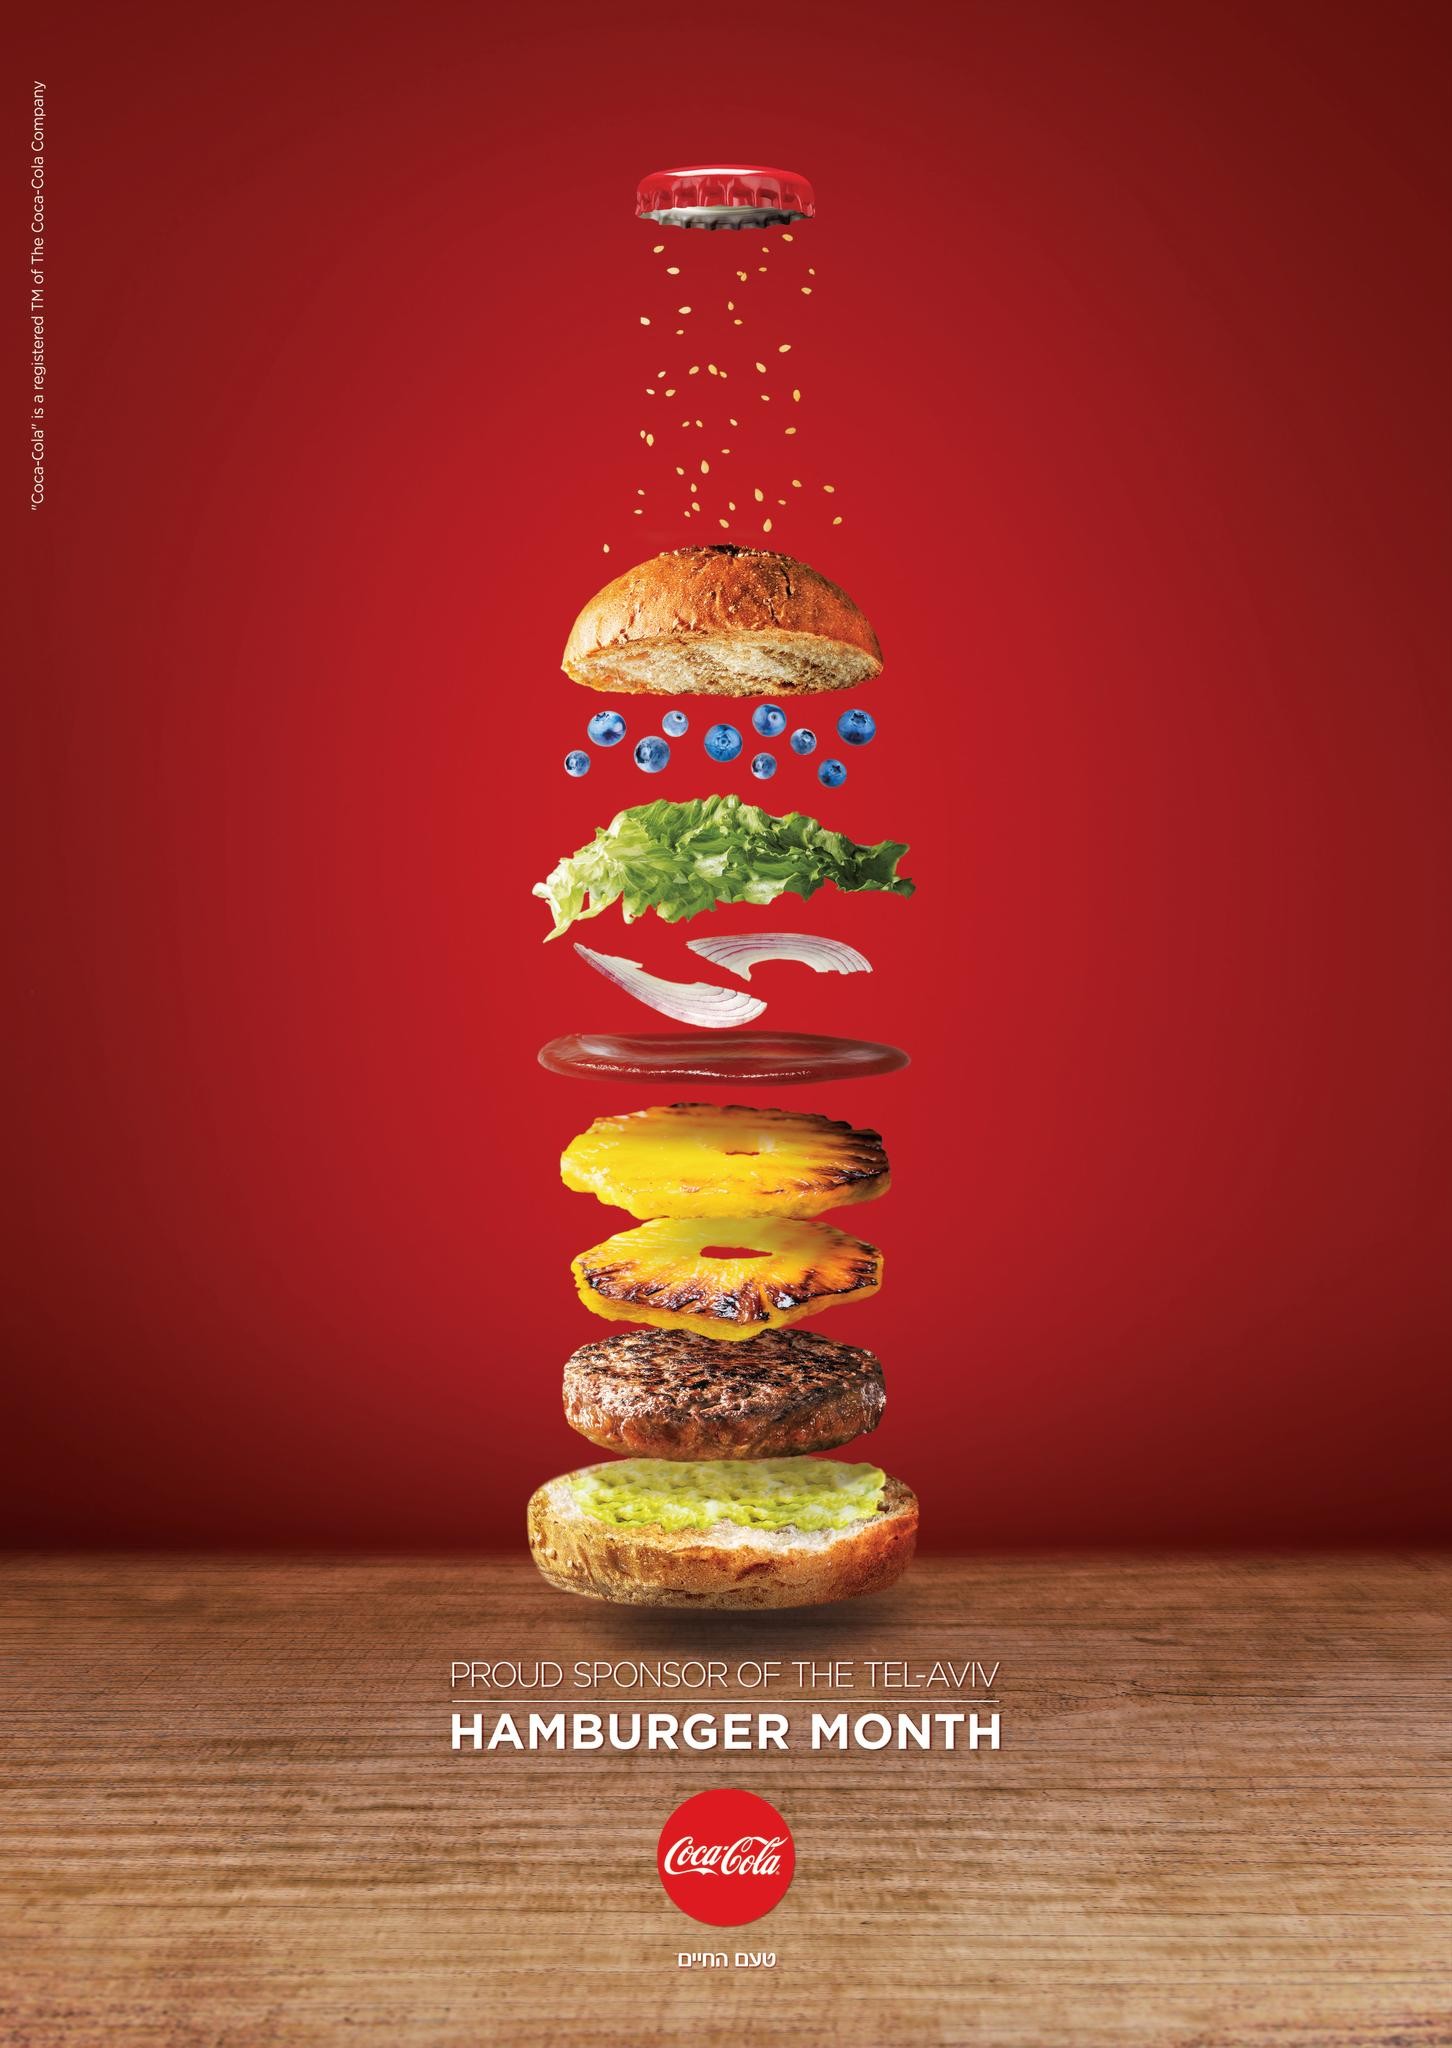 'The Perfect Match for Hamburger Month'